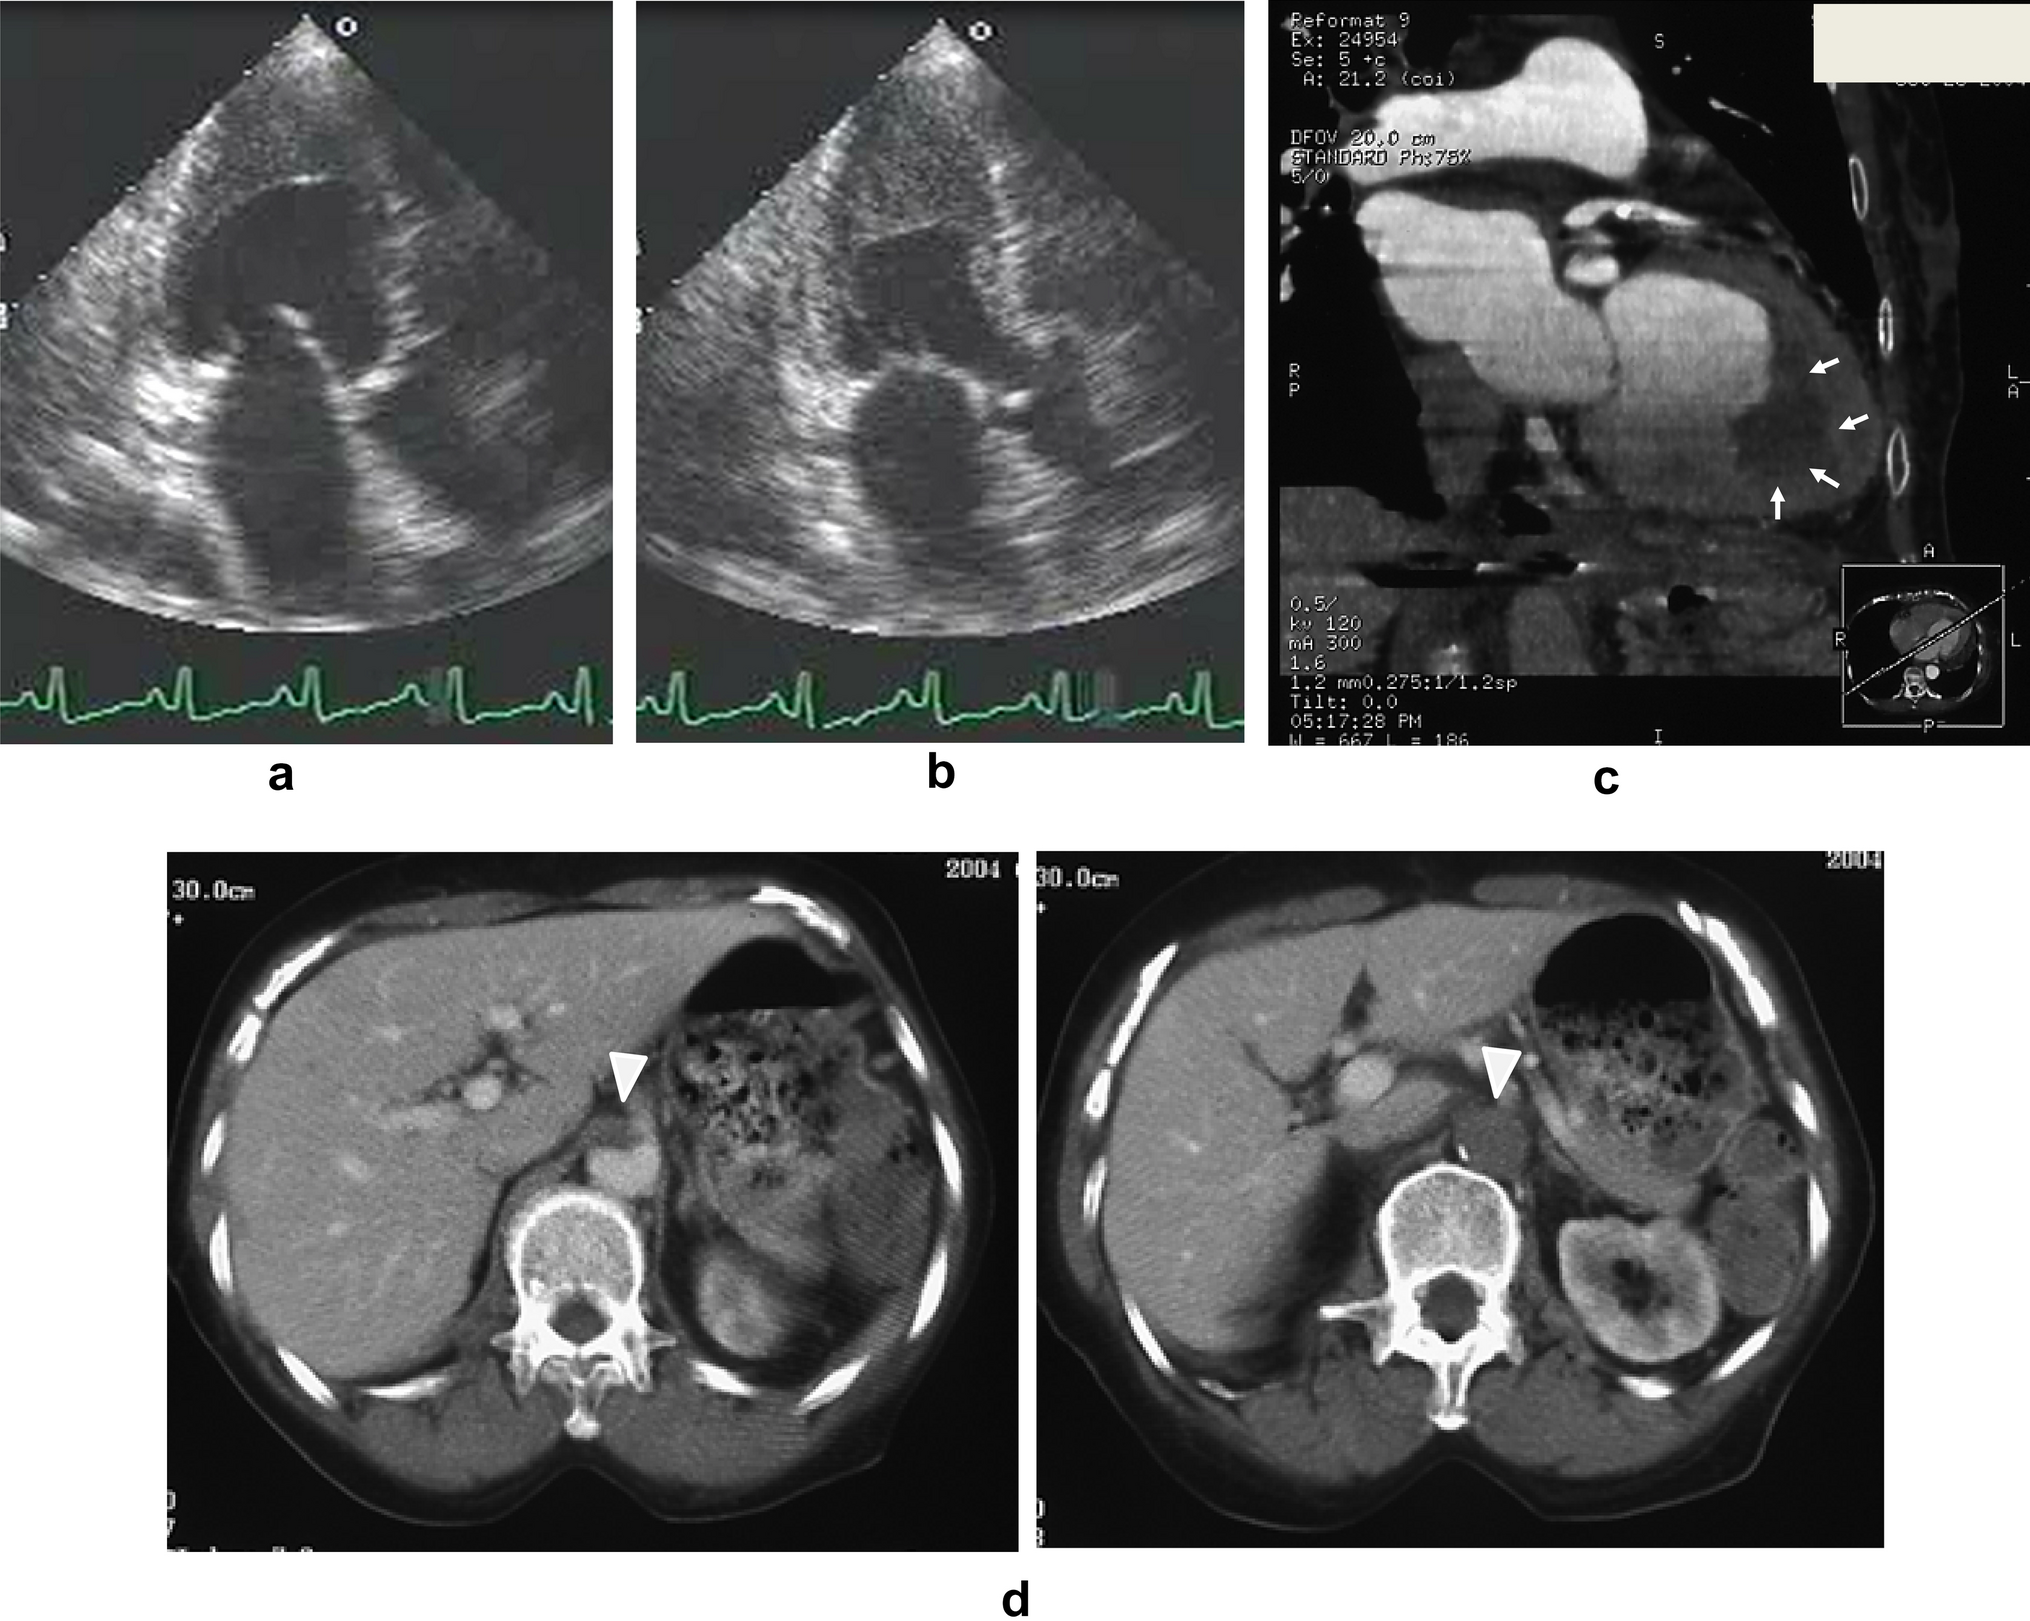 Synchronized motion of intracardiac thrombus with preserved left ventricular contraction in a patient with eosinophilic granulomatosis with polyangiitis